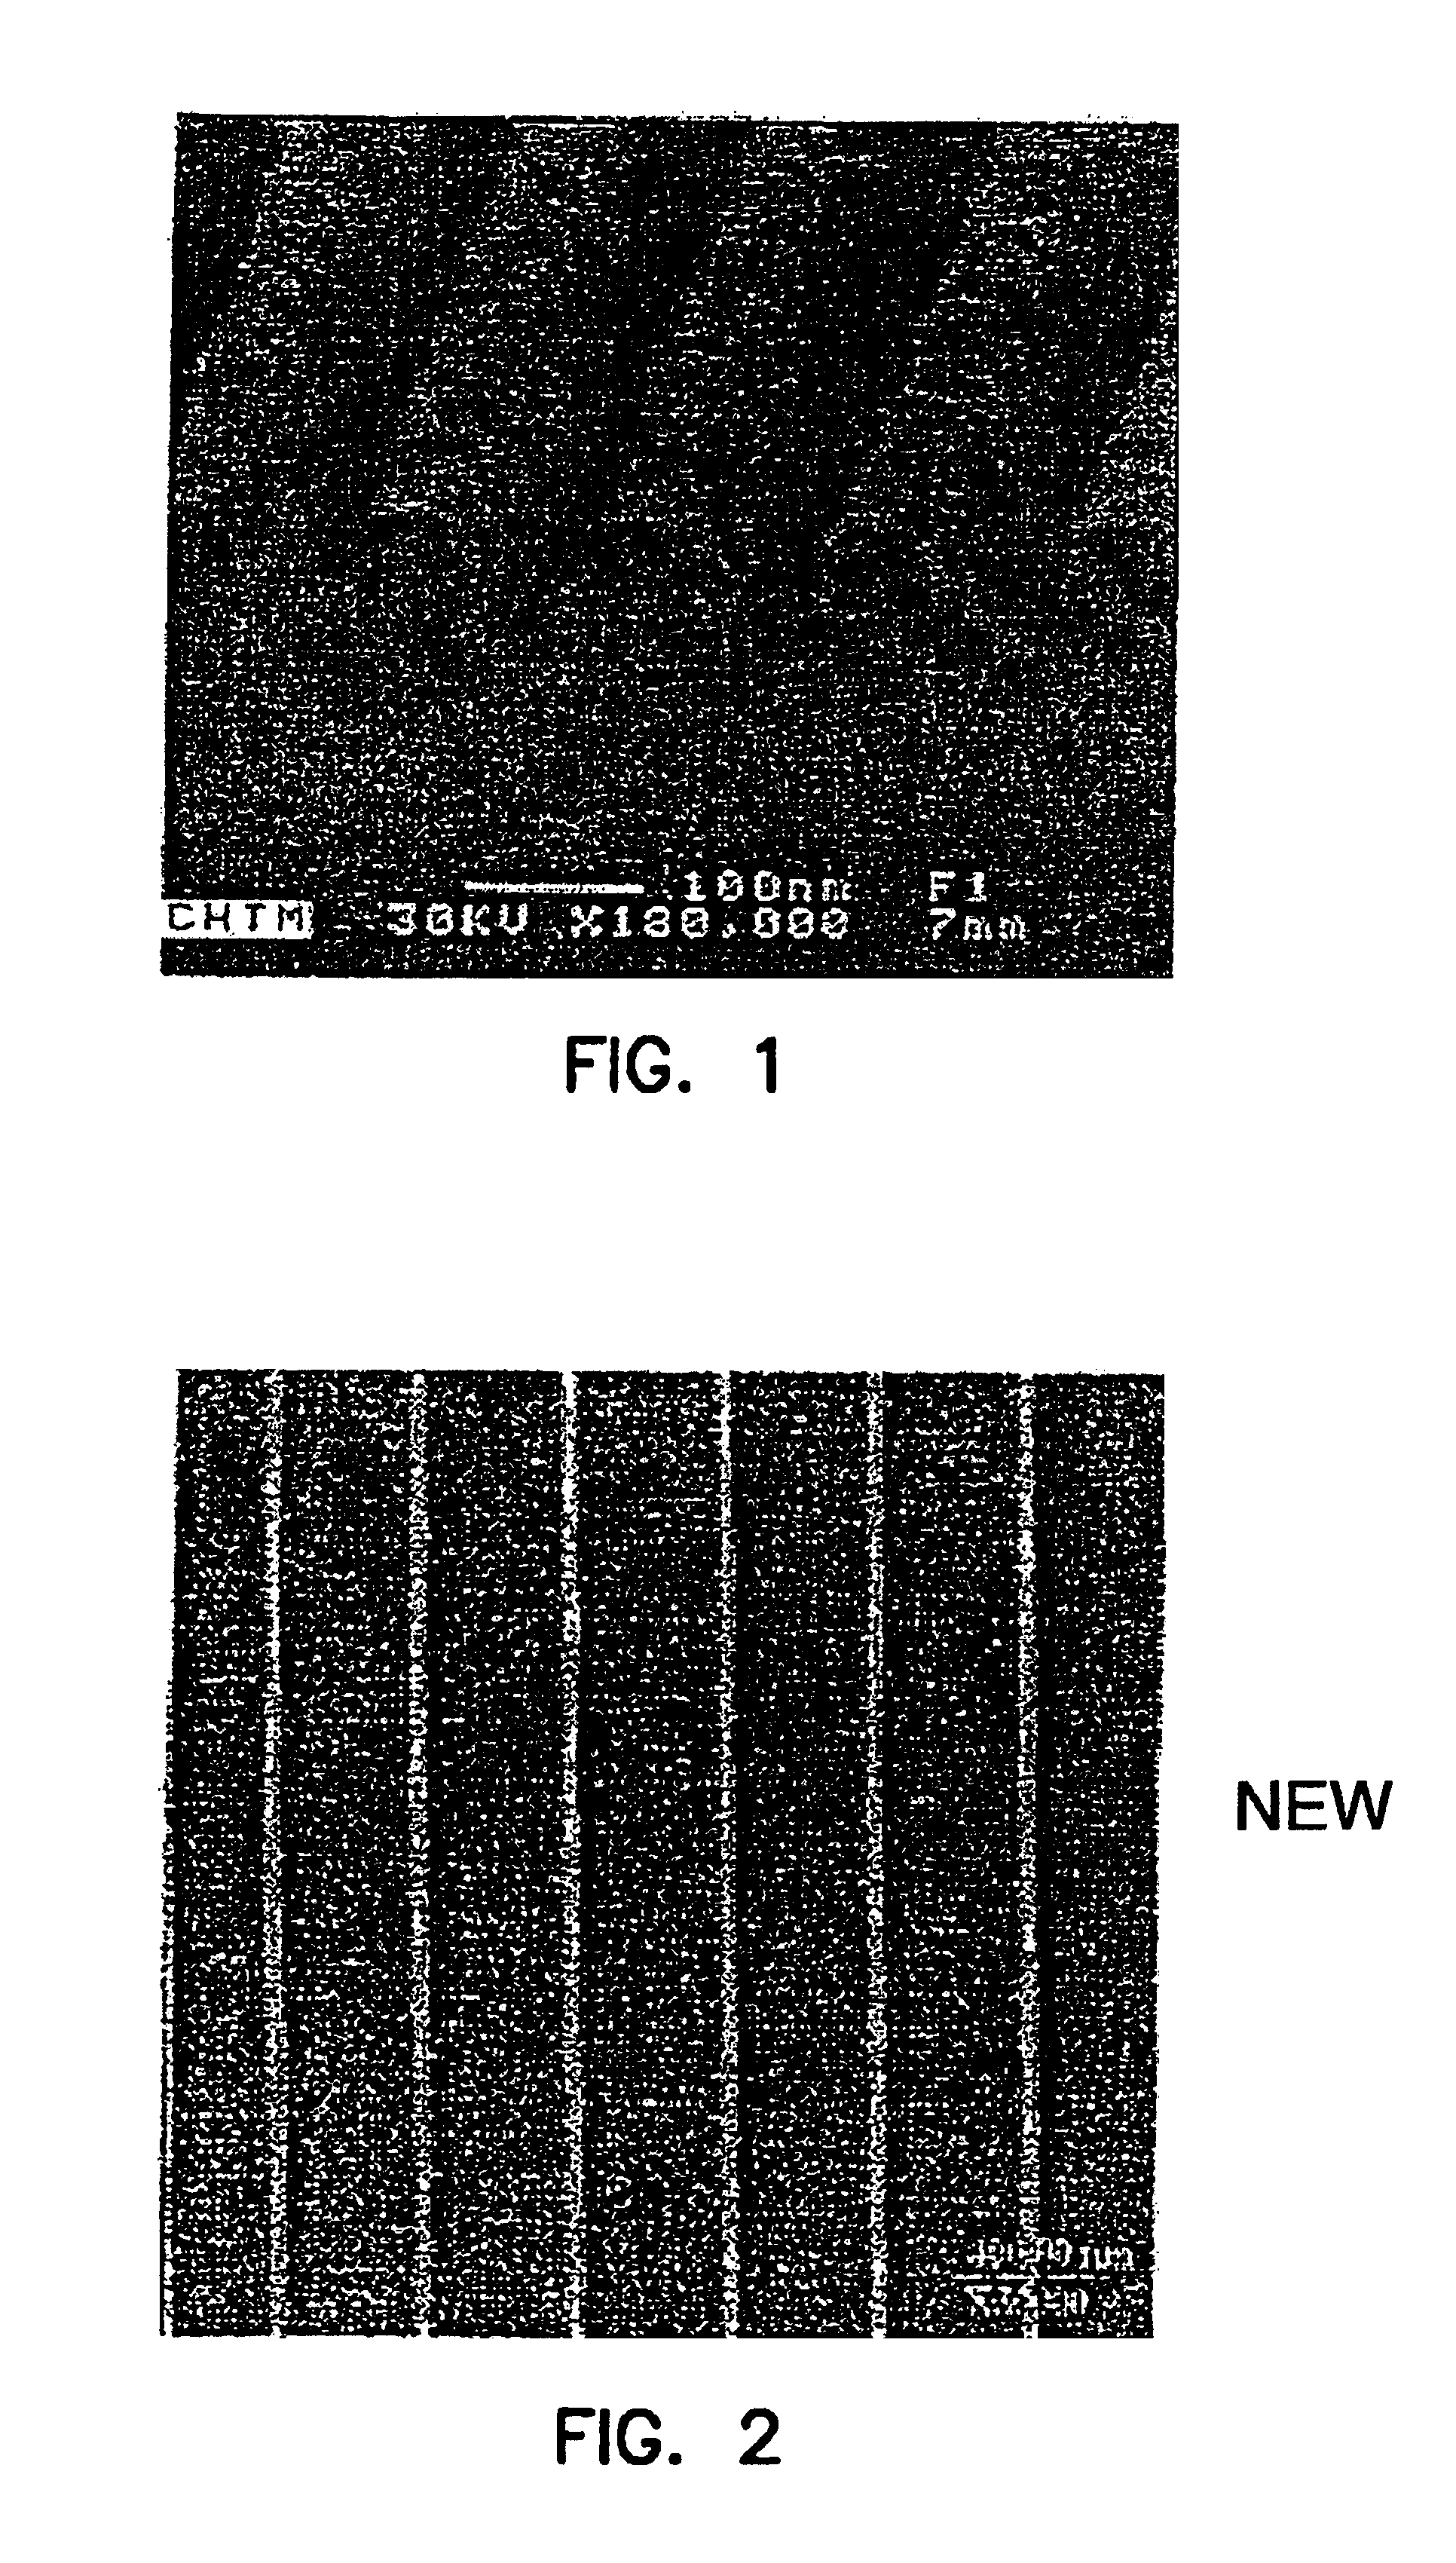 Nanostructured separation and analysis devices for biological membranes